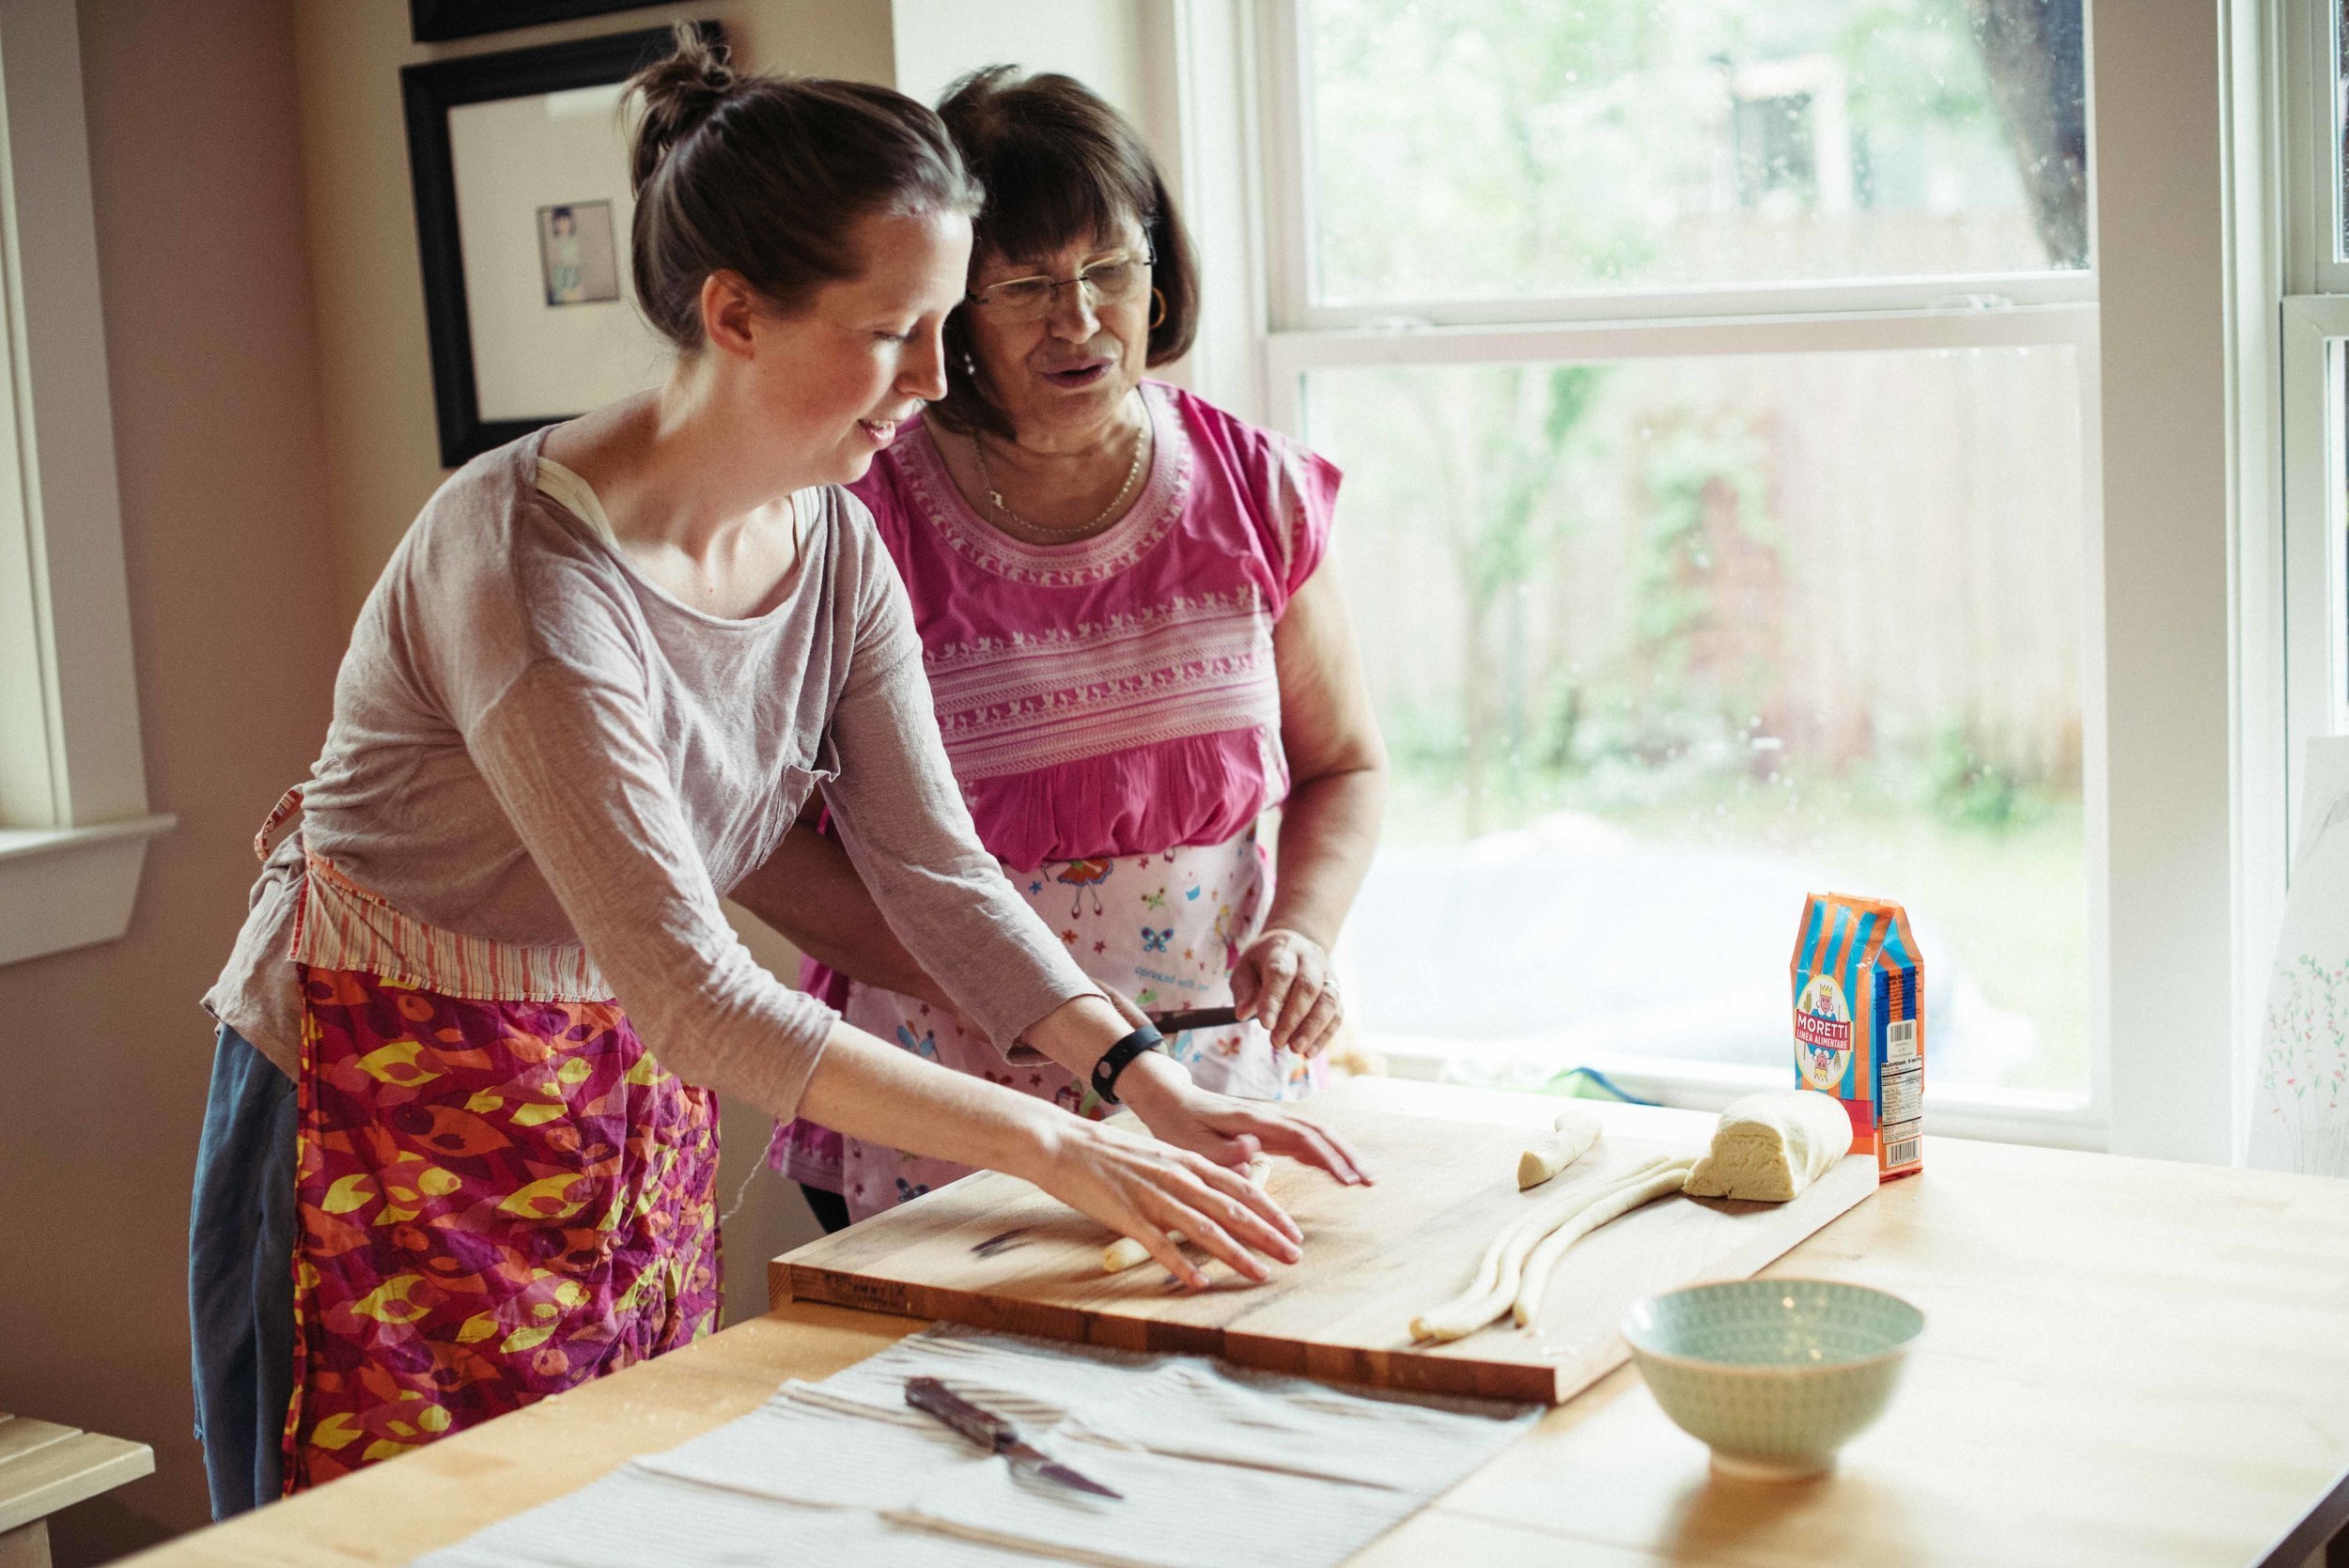 Two women wearing aprons are skillfully preparing food on a cutting board in a captivating food photography image..jpg